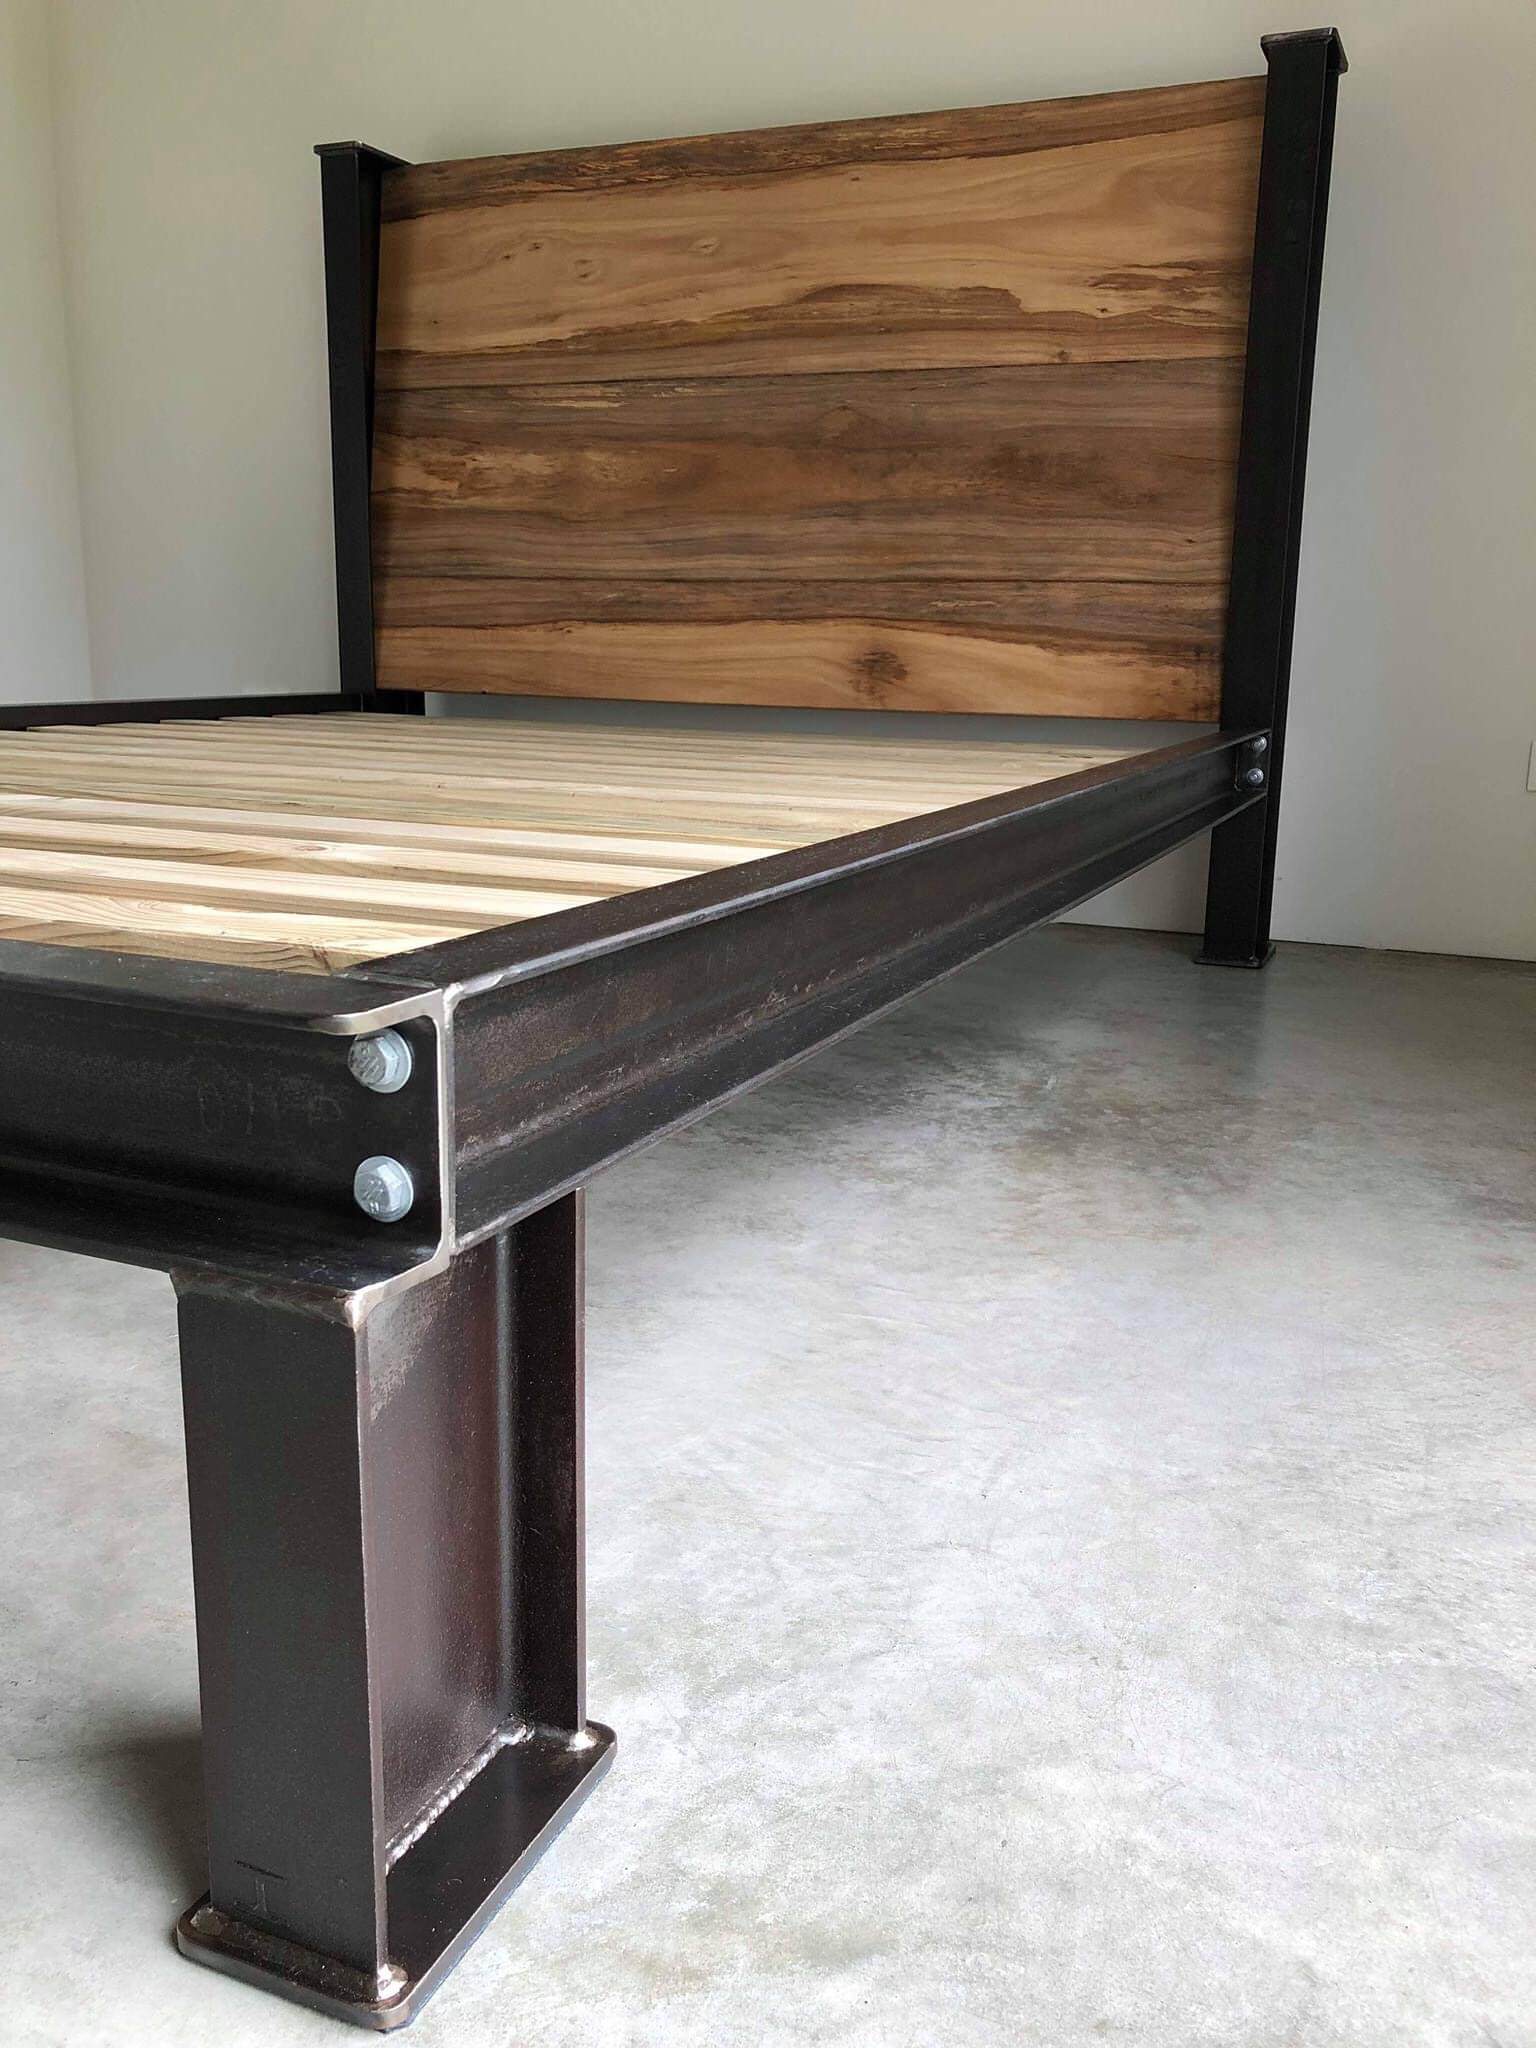 Industrial Furniture Bed Frame, Farmhouse decor, Reclaimed timber, Blackened ste